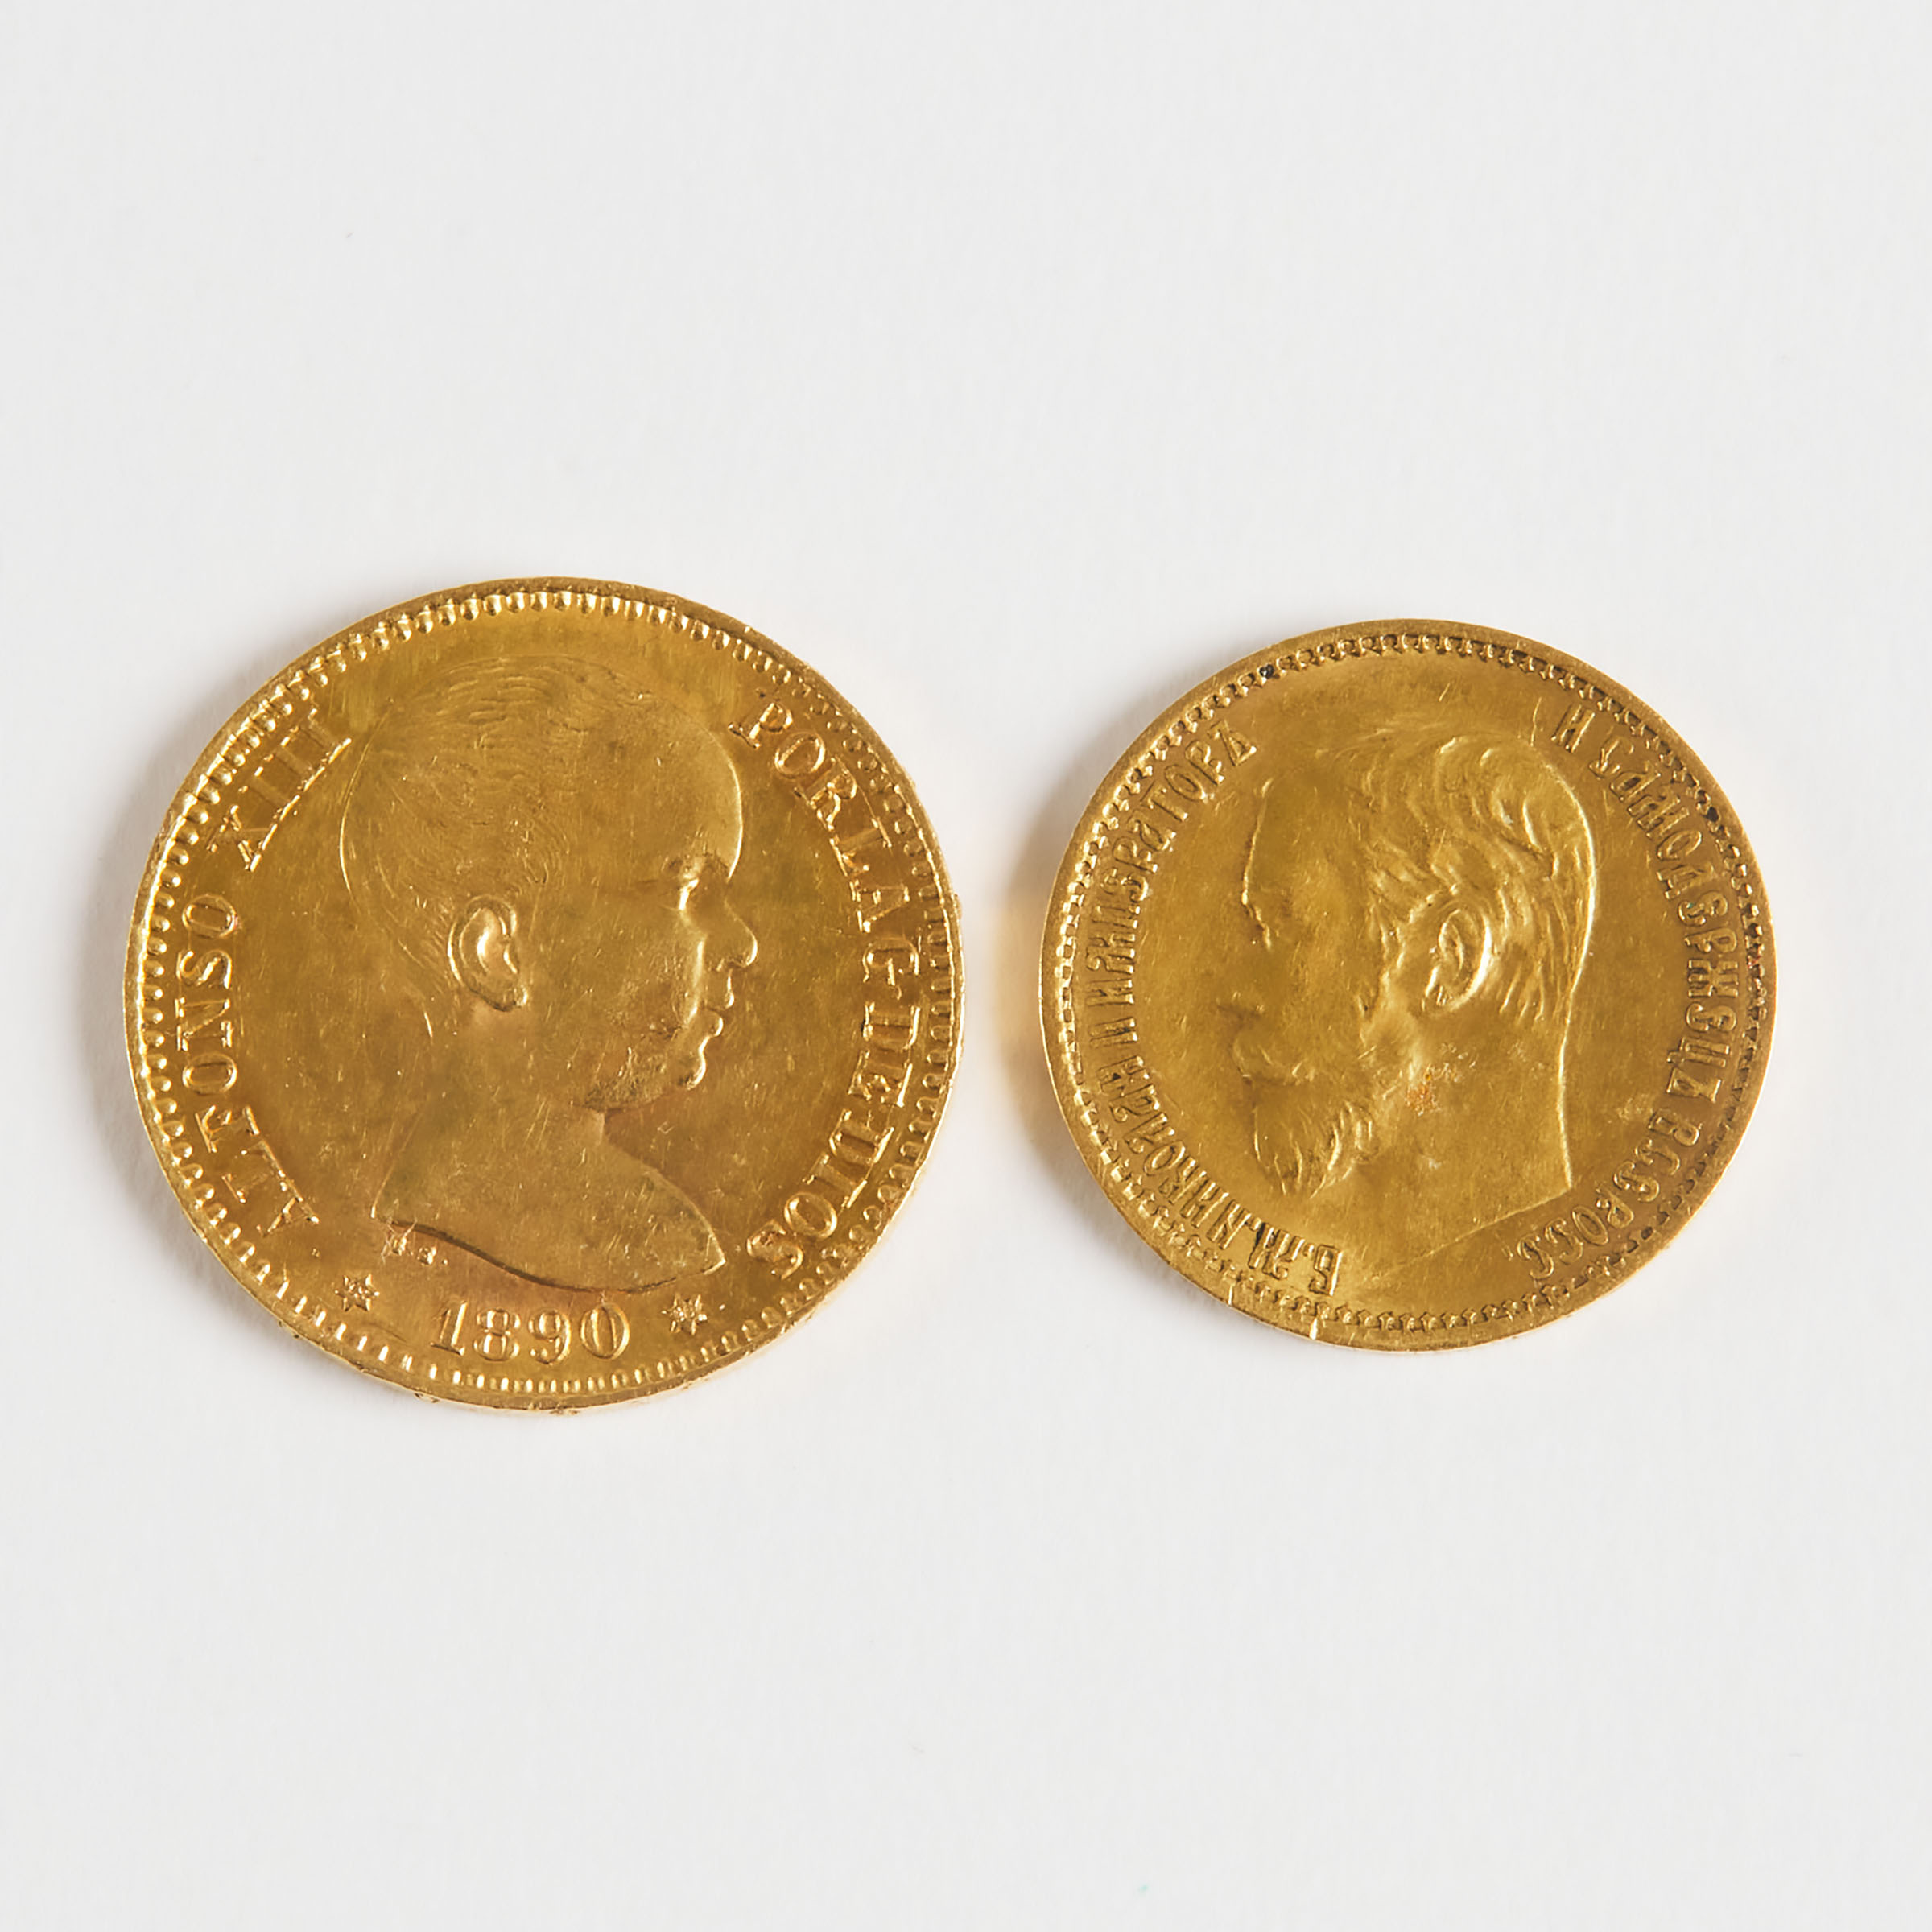 A Spanish and a Russian Gold Coin